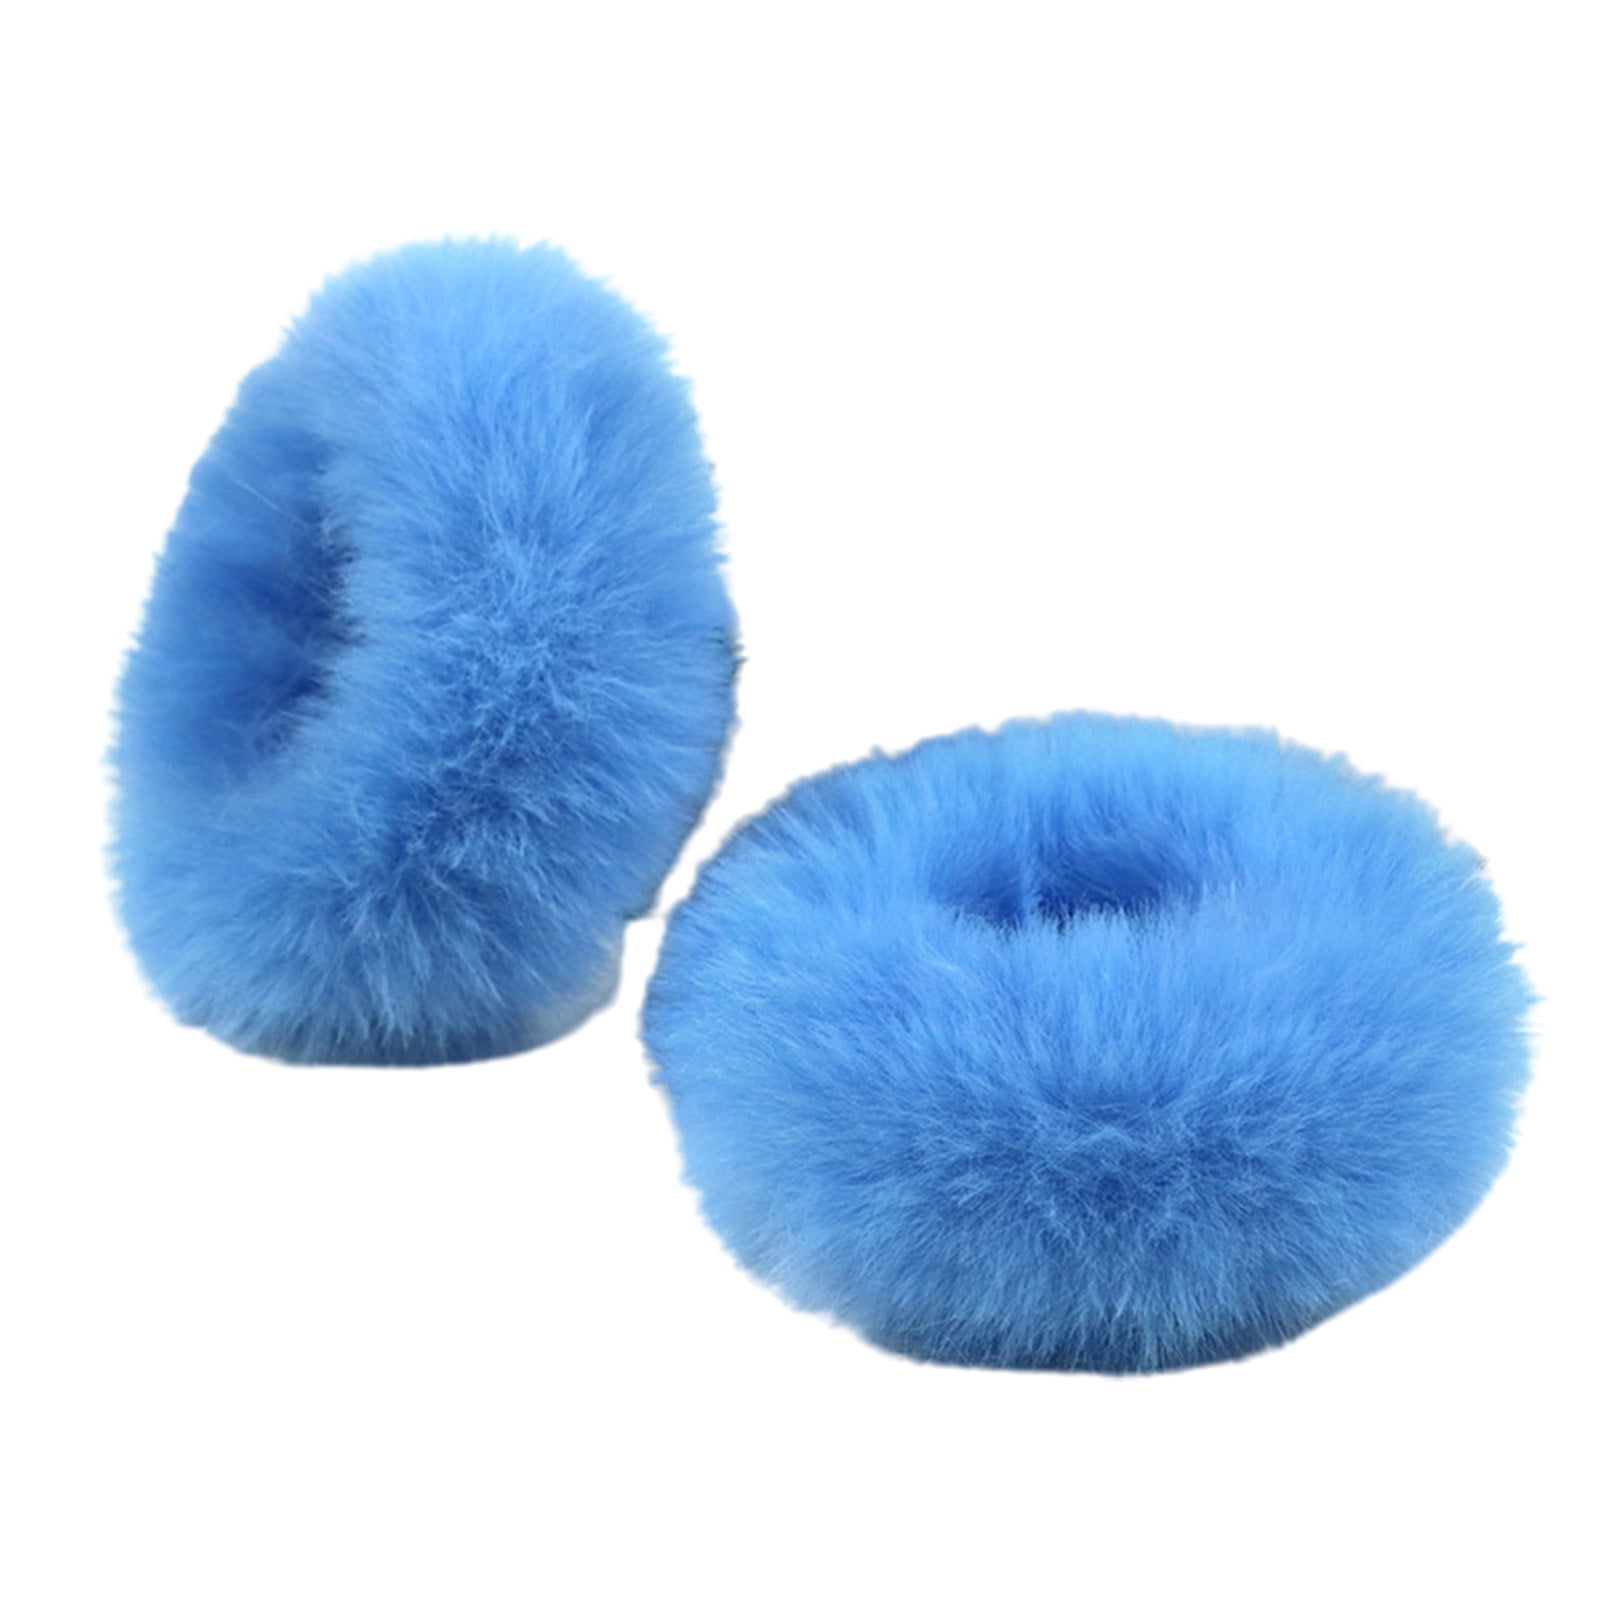 2x Girl Hair Ring Furry Scrunchie Fluffy Faux Fur Rope Band Elastic Party Decor 